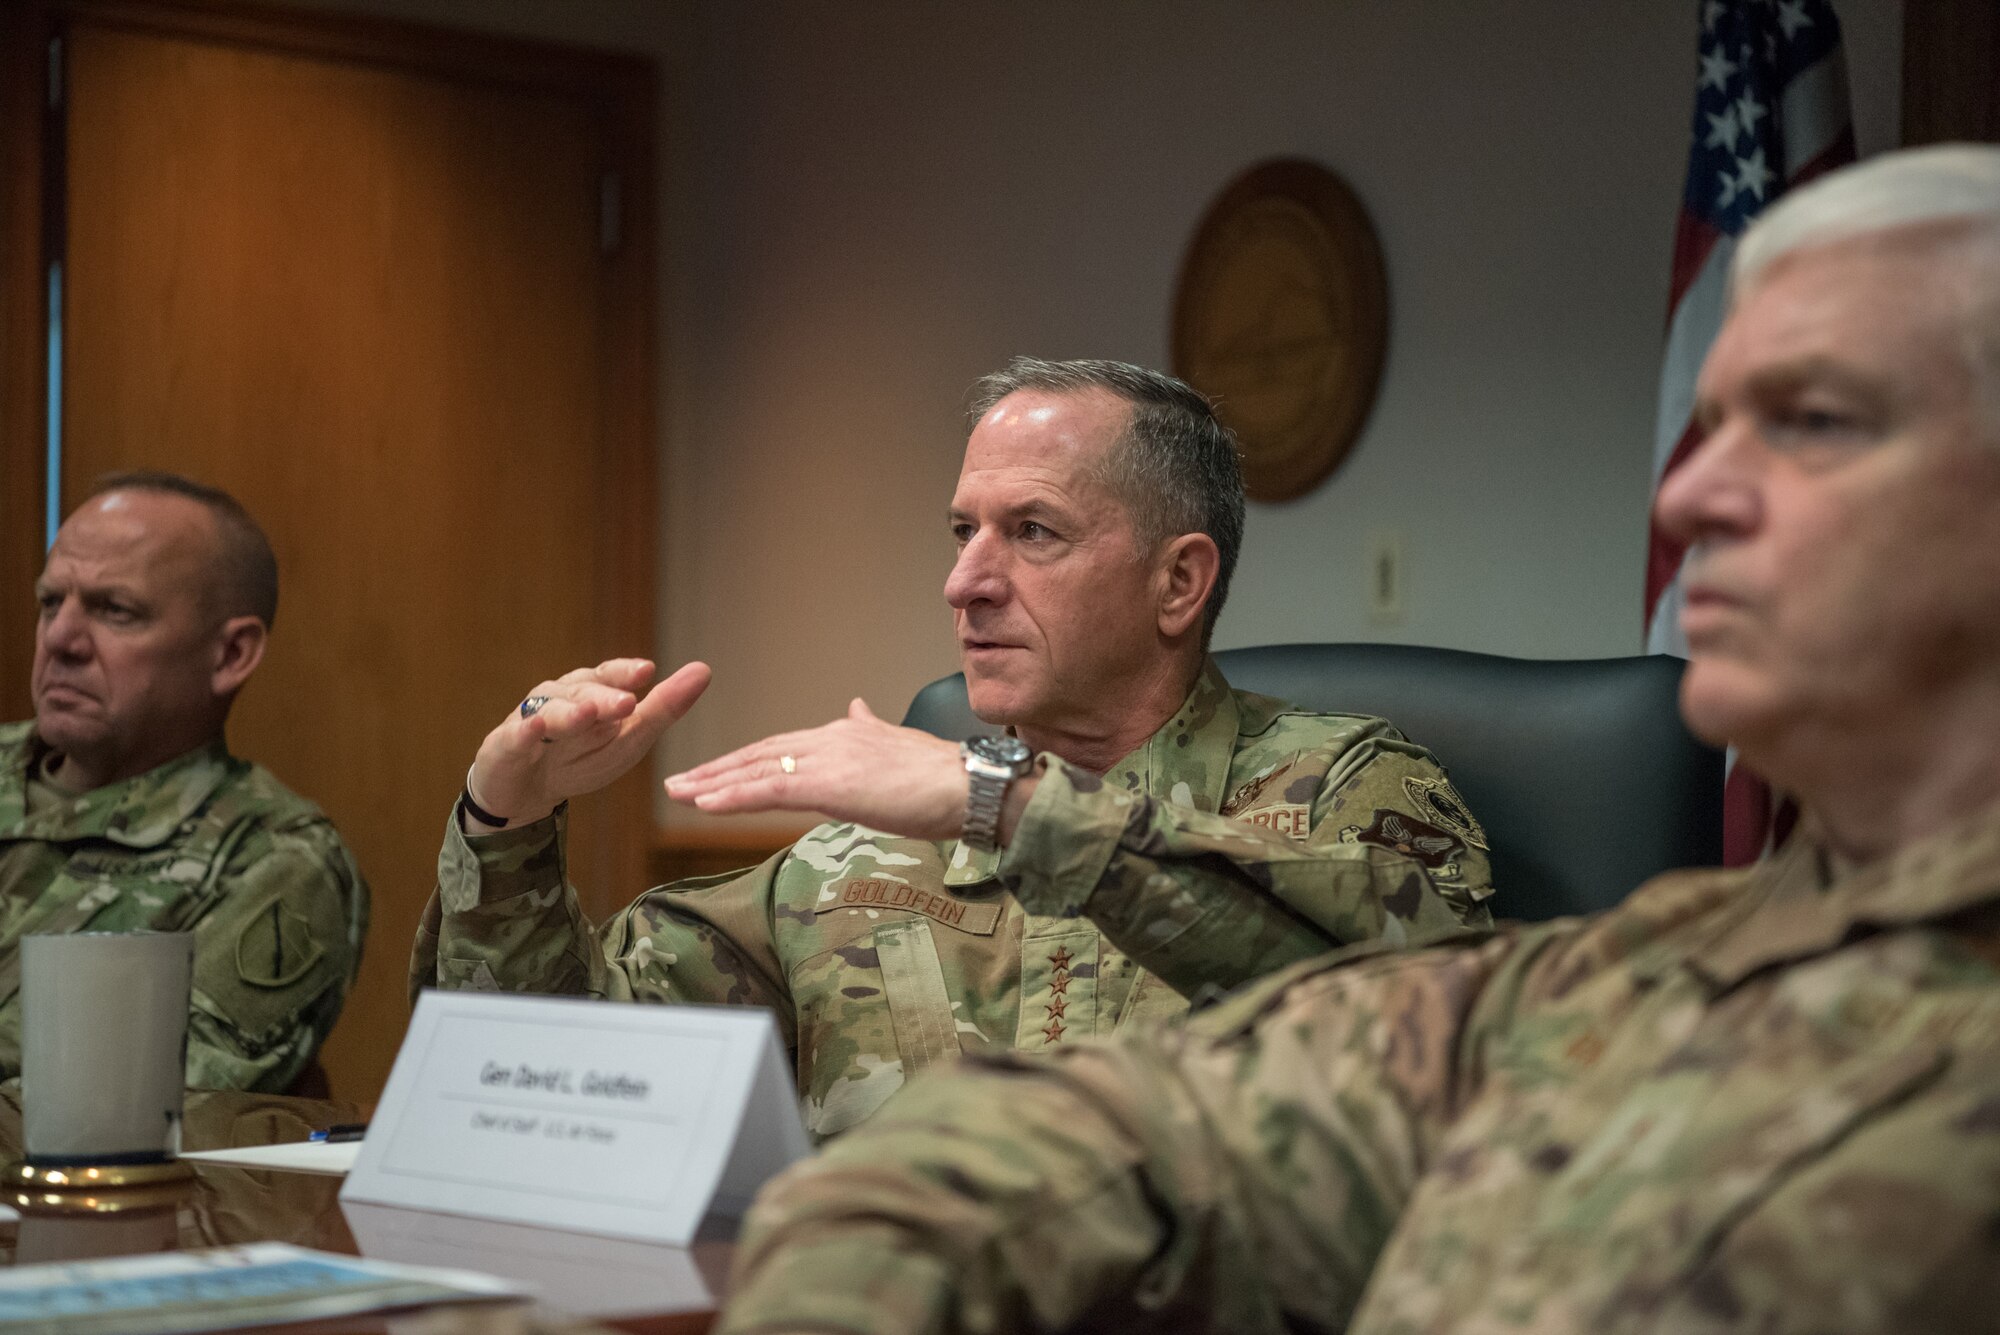 Air Force Chief of Staff Gen. David L. Goldfein learns about the unique mission capabilities of the 123rd Airlift Wing during a visit to the Kentucky Air National Guard base in Louisville, Ky., Aug. 10, 2019. The wing is home to a special tactics squadron and the only contingency response group in the Air National Guard. (U.S. Air National Guard photo by Staff Sgt. Joshua Horton)